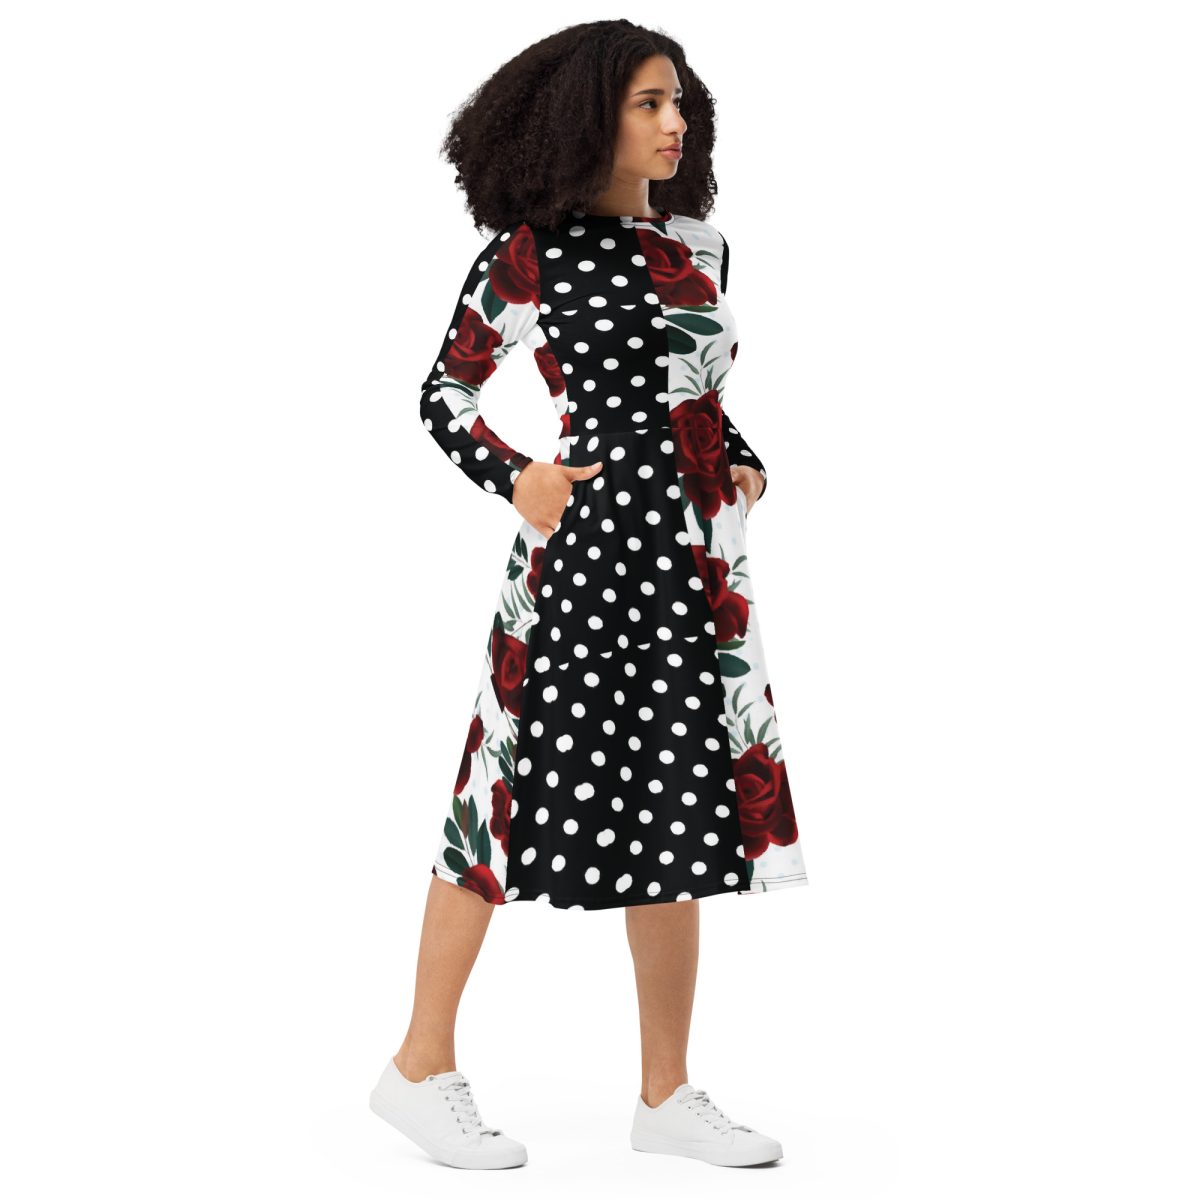 white dress with sleeves | rose dress | african dresses for women